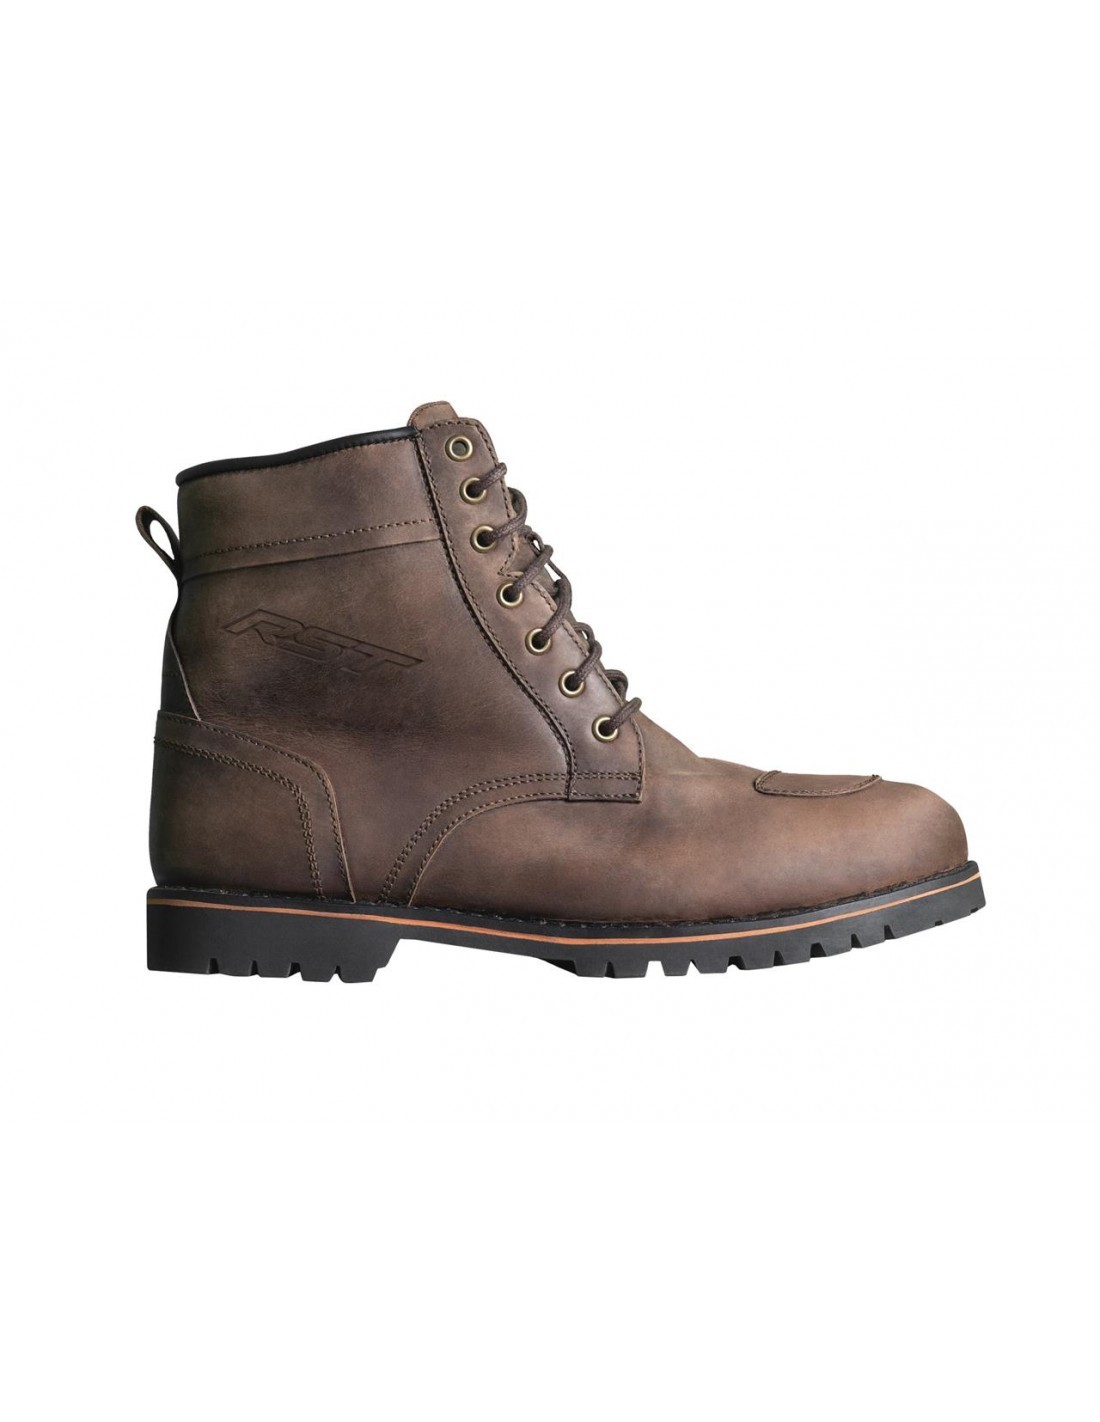 RST Boots - Roadster II WP Brown